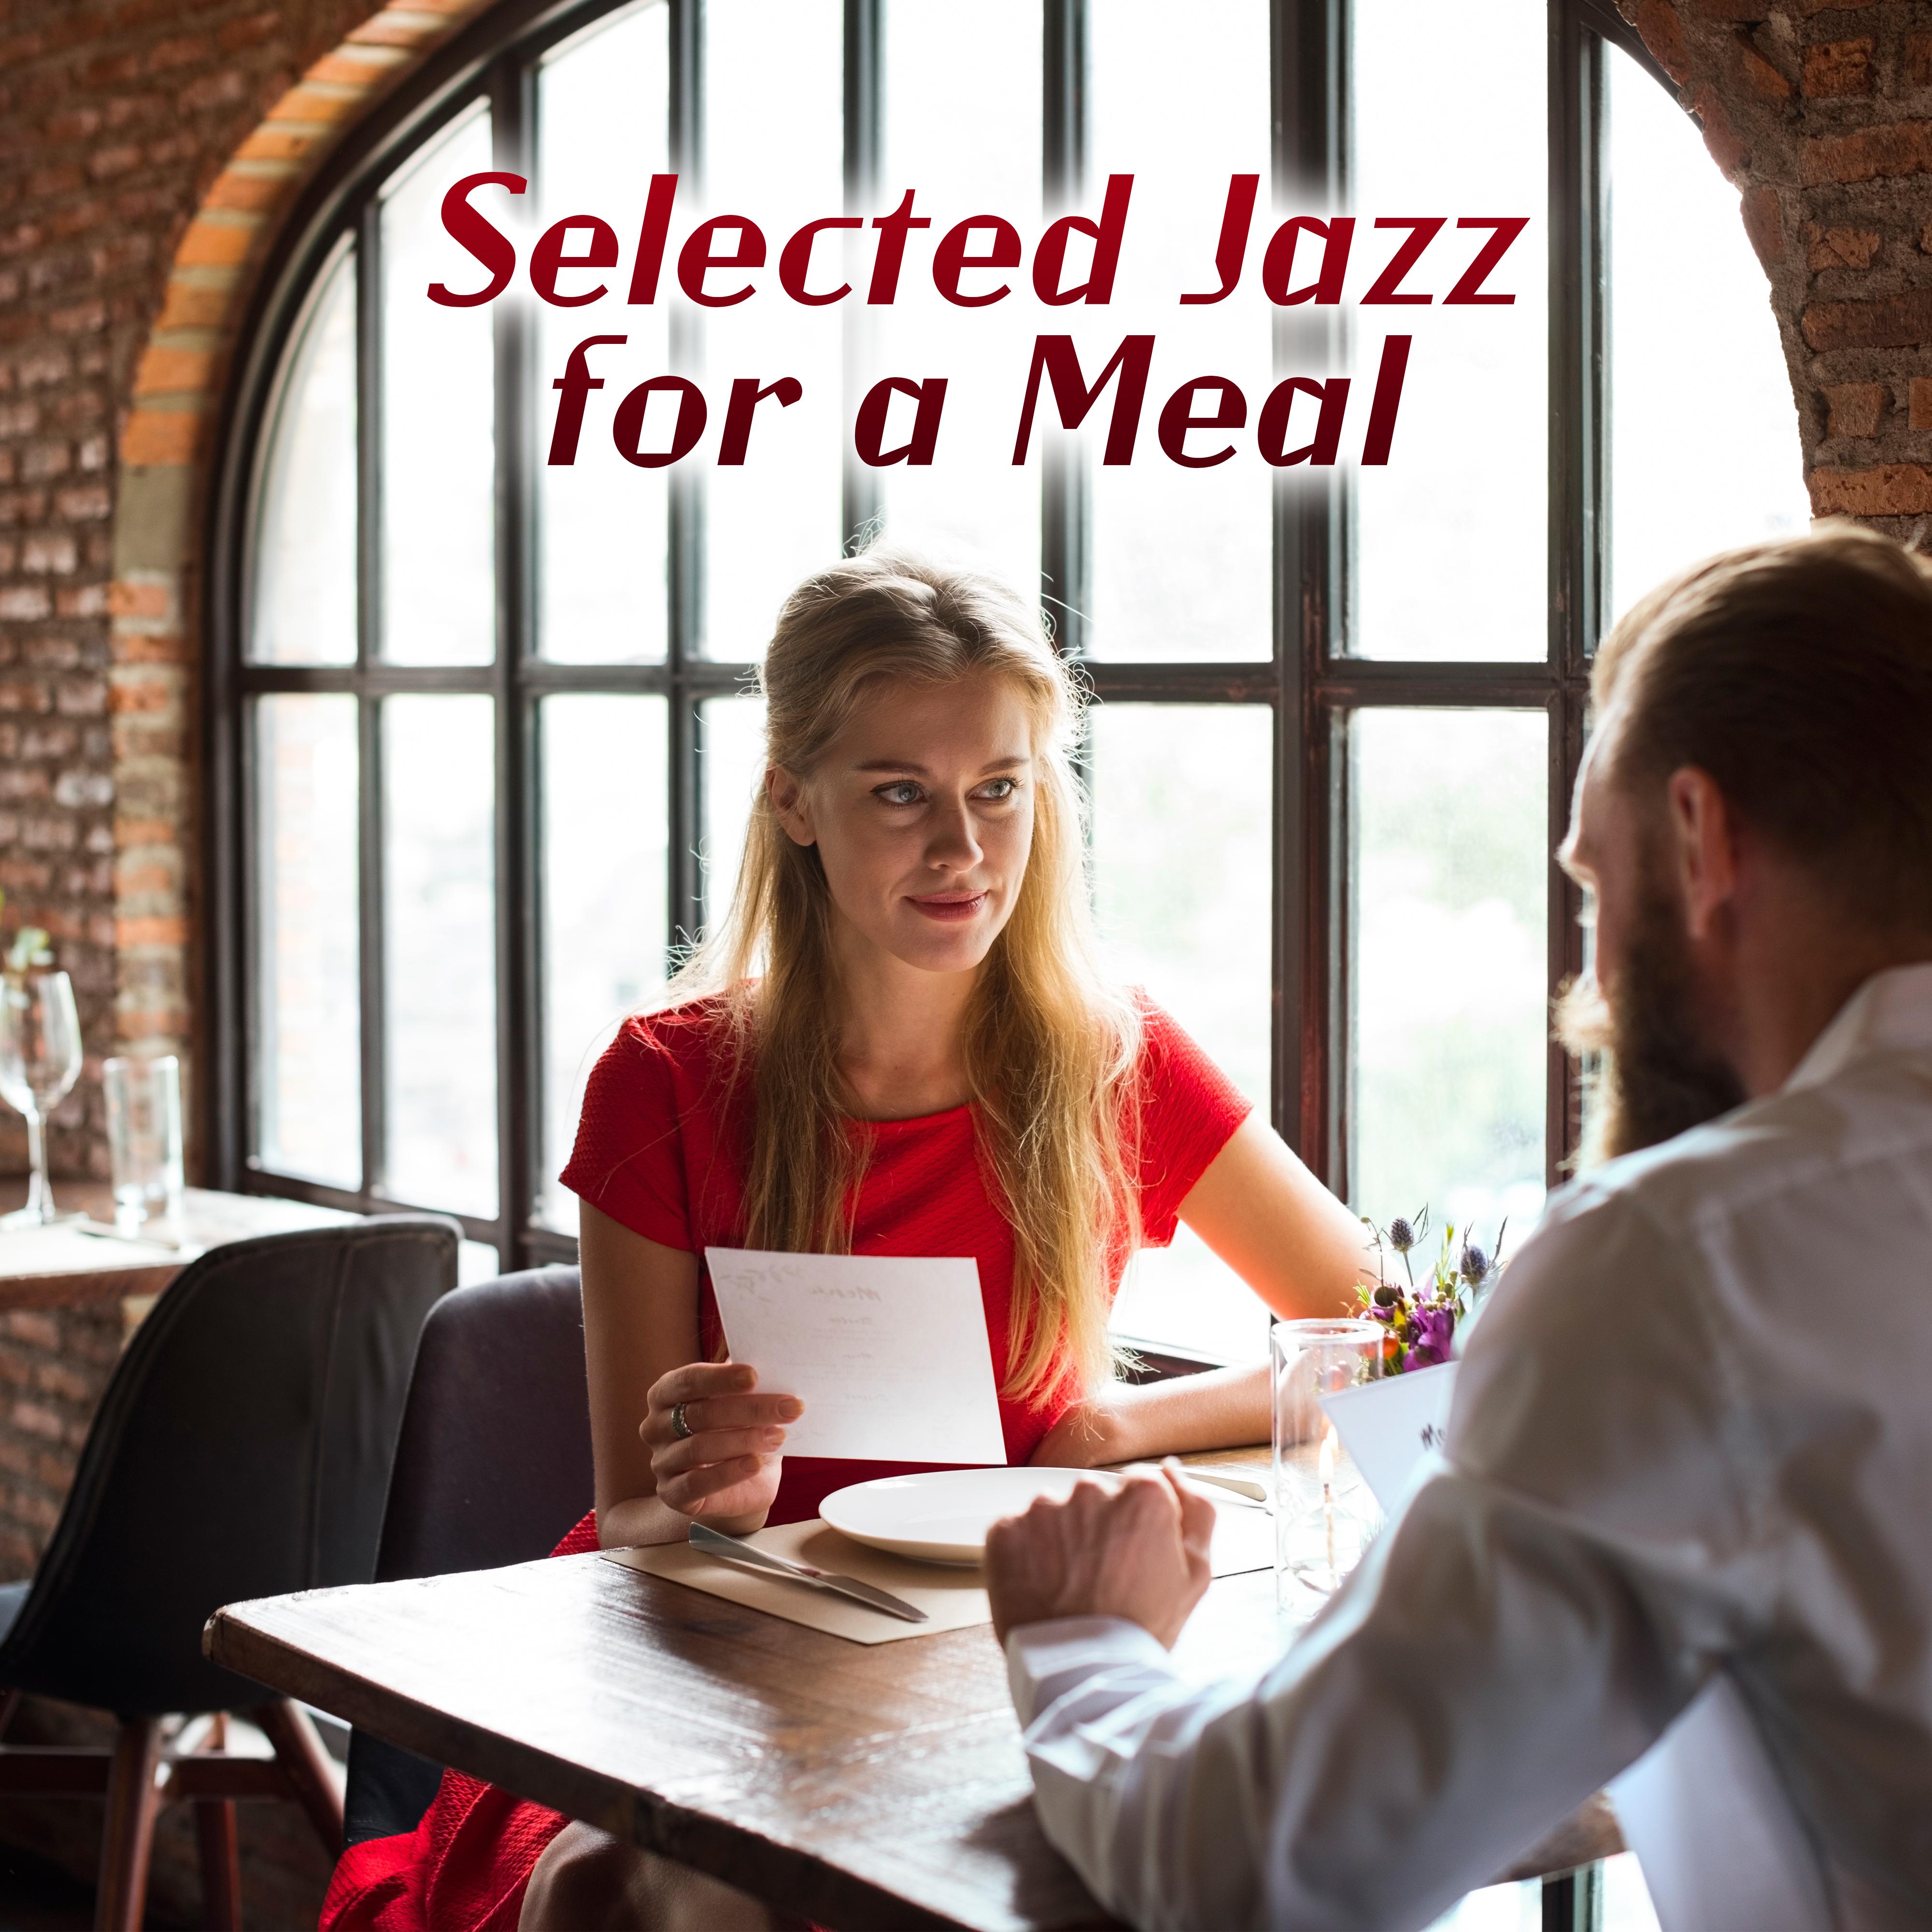 Selected Jazz for a Meal